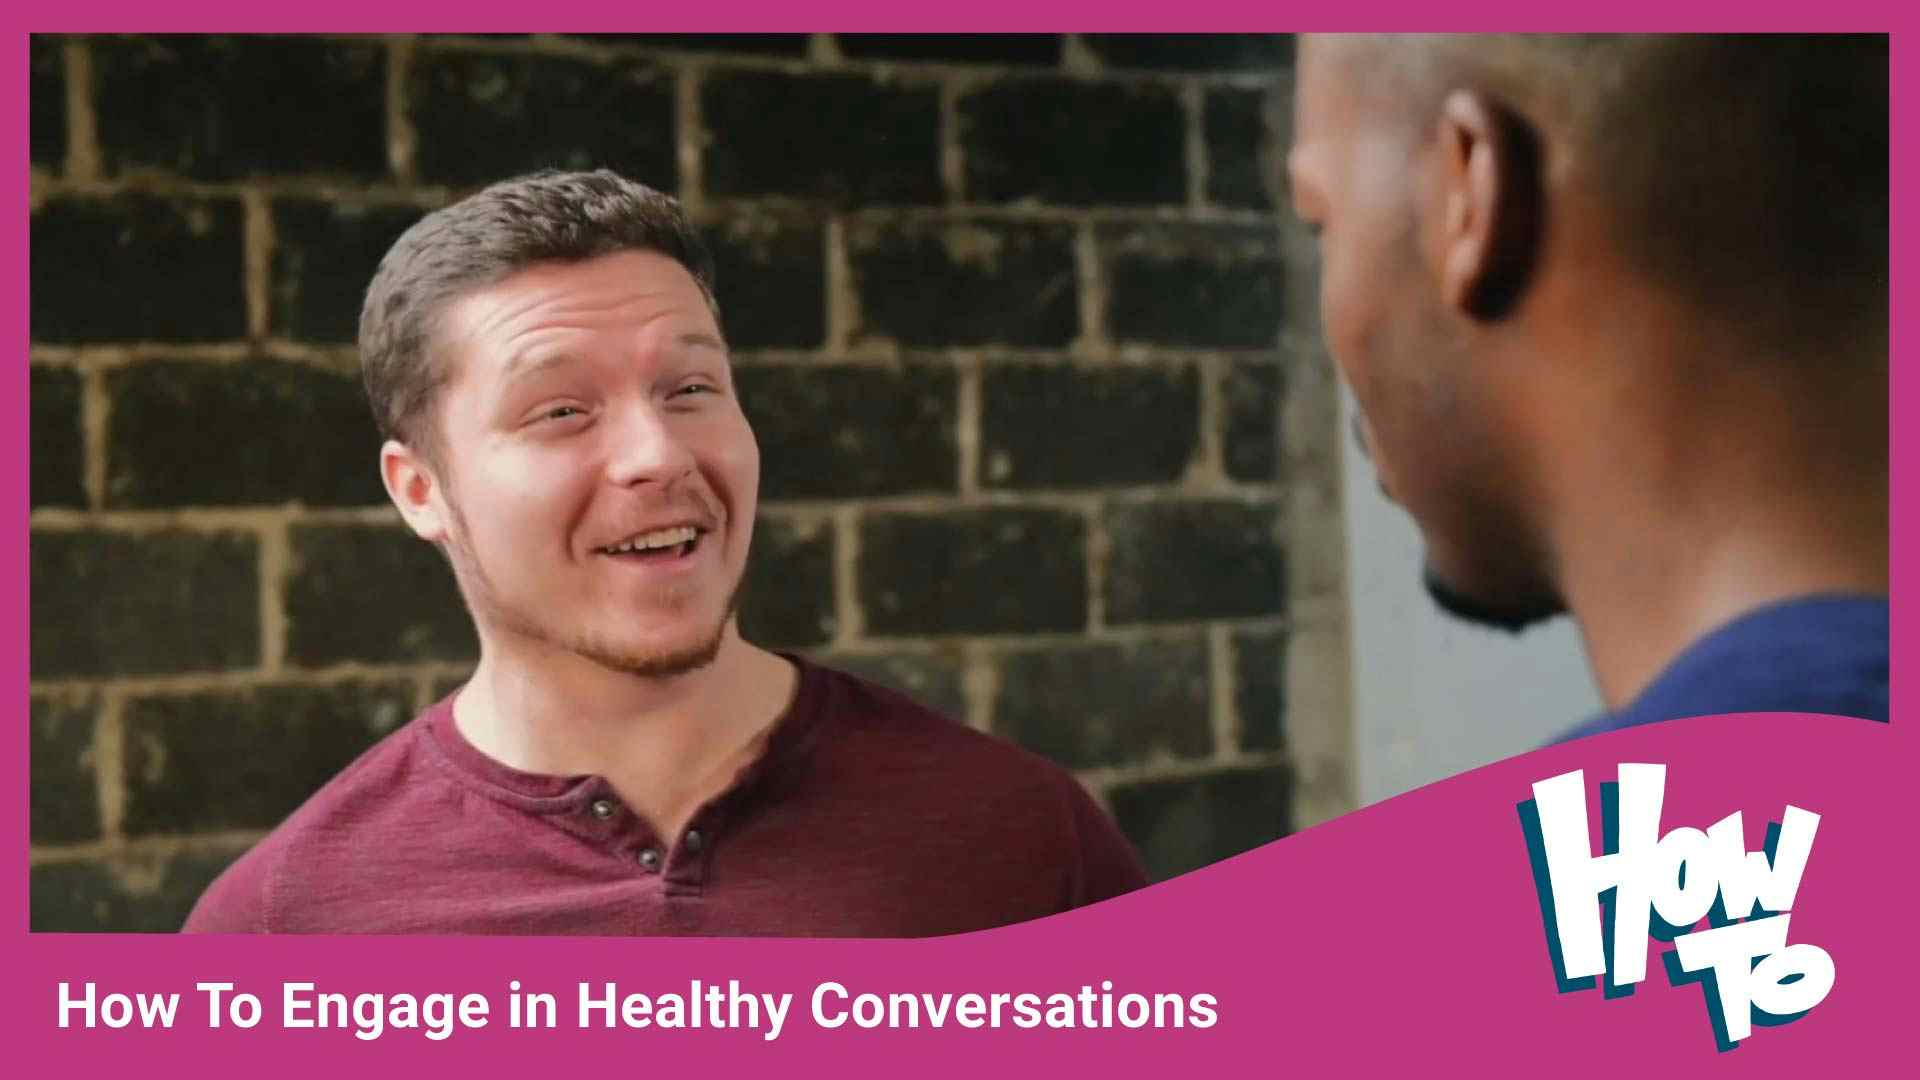 How To Engage in Healthy Conversations